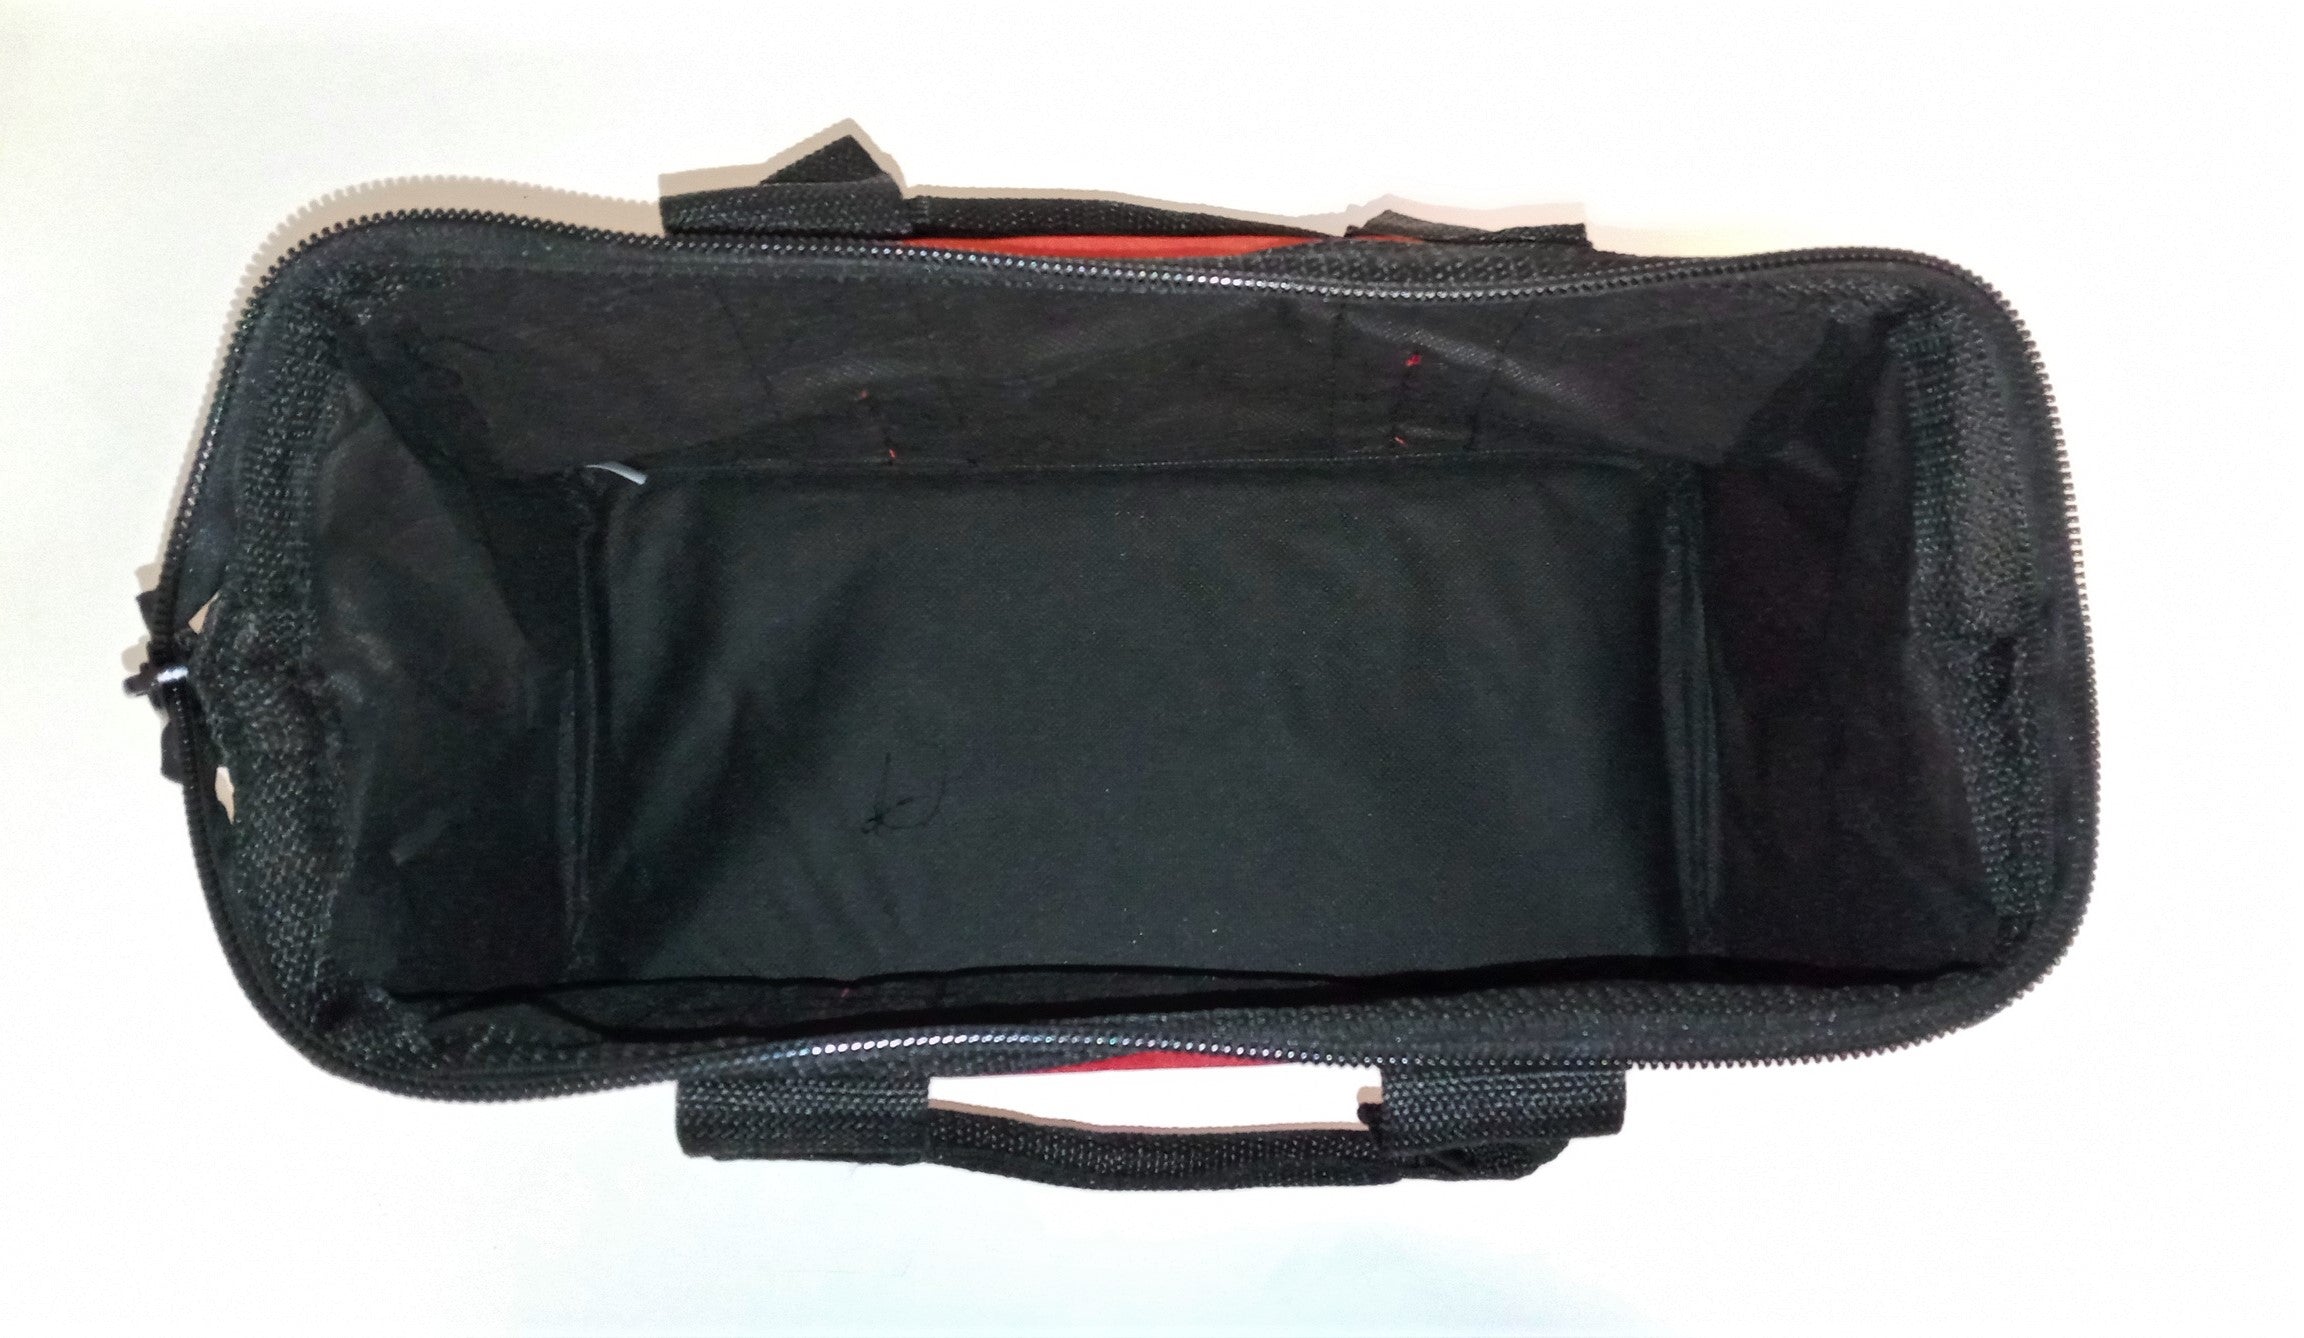 Milwaukee 42-55-6148 Small Contractor Tool Bag 13" Long x 7" Wide x 8" High